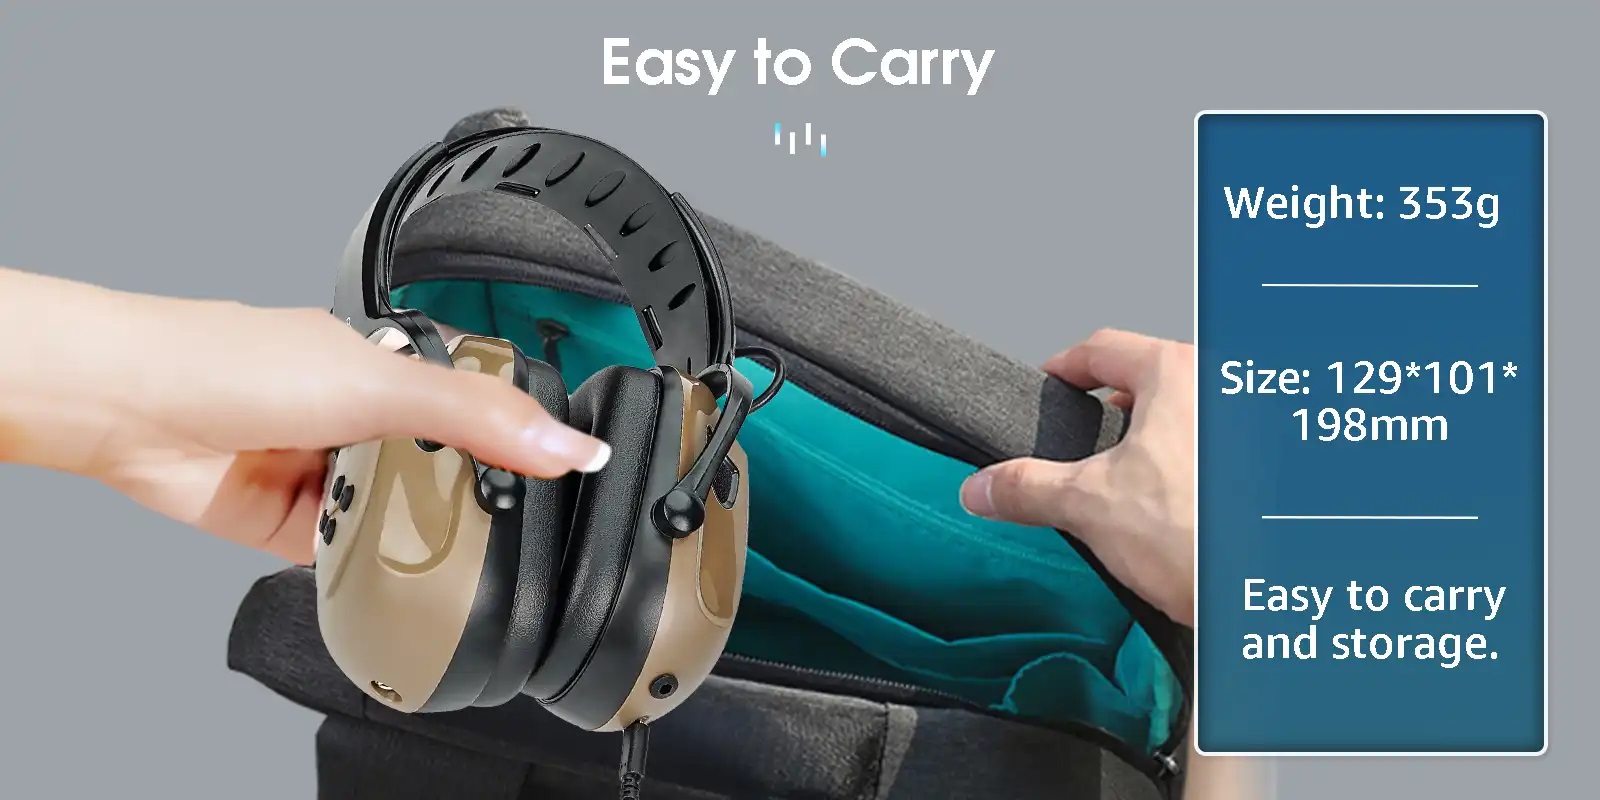 The Bluetooth earmuff is foldable and comes with a pouch for easy carrying anywhere.